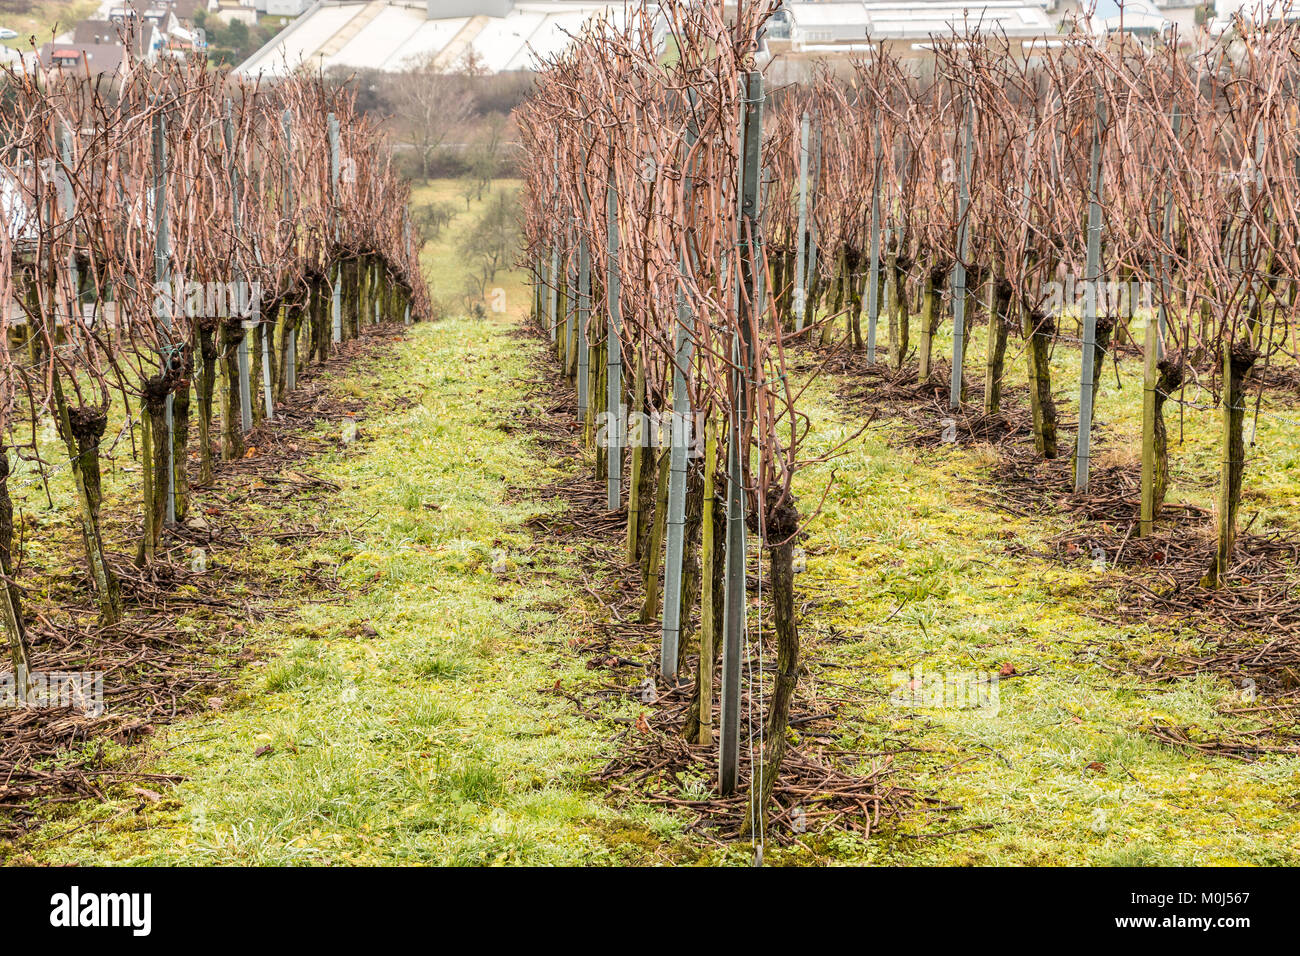 Vineyard and long lines of grapevines Stock Photo